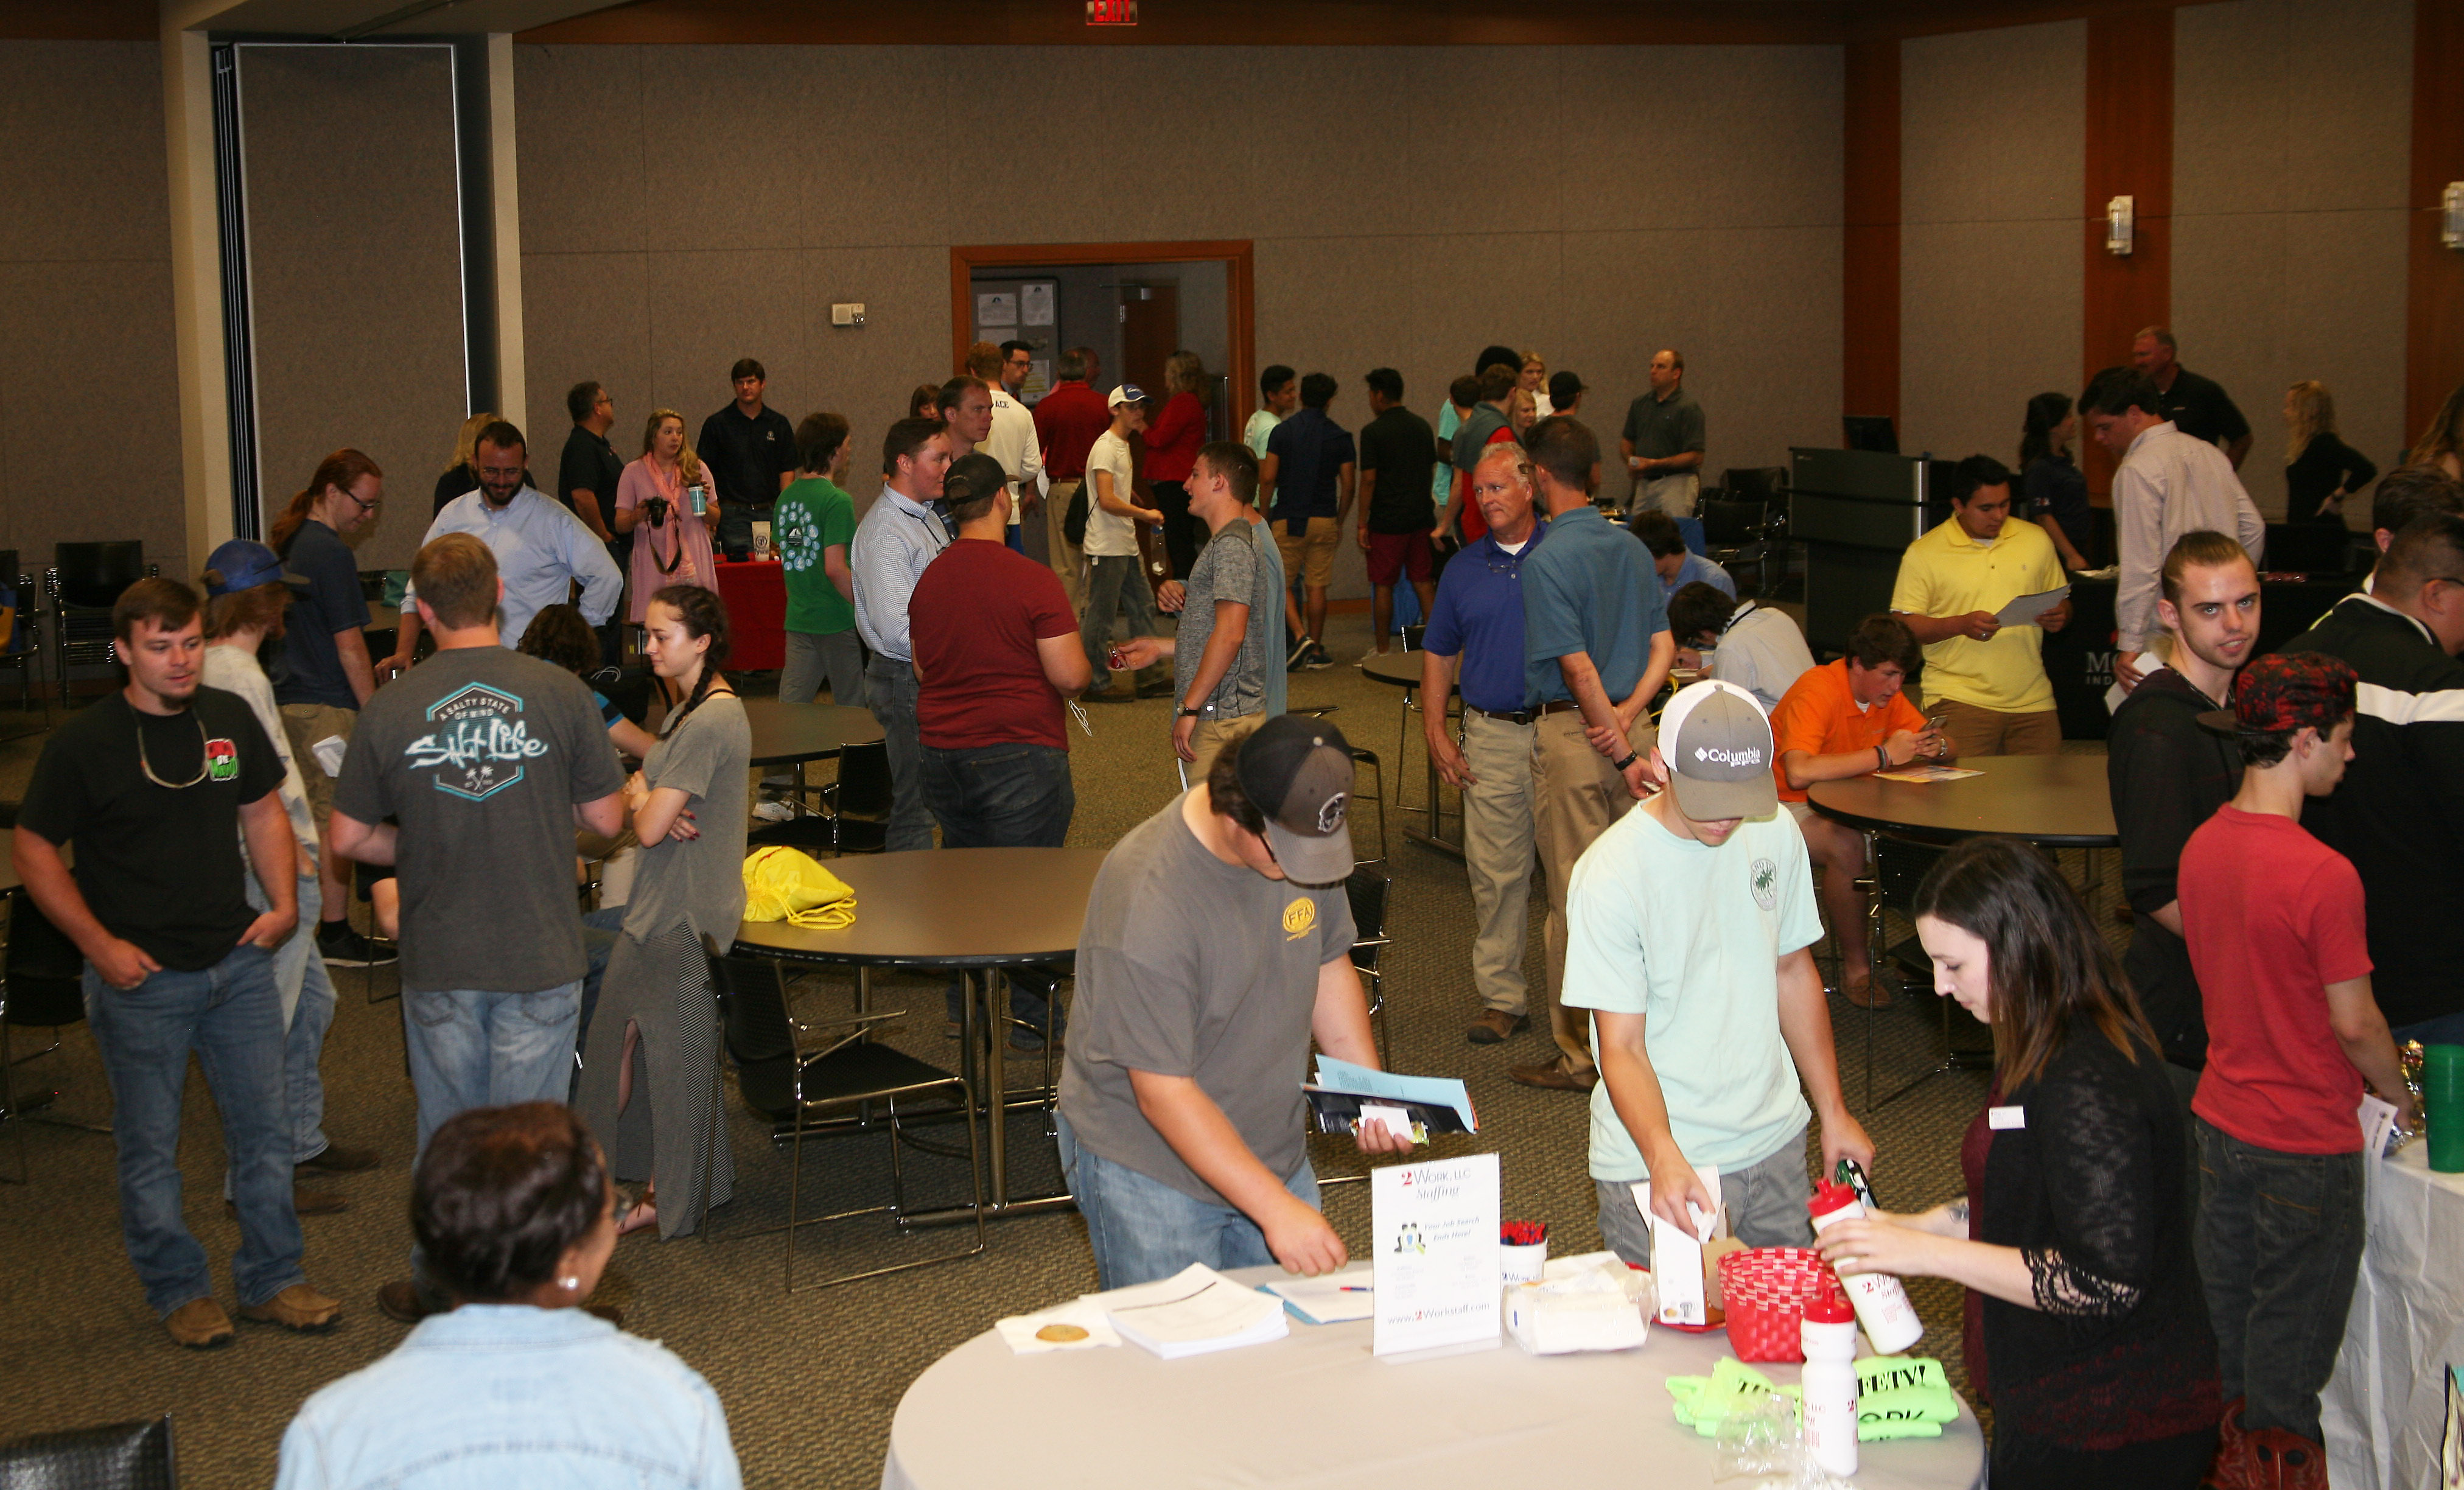 A Job Fair was held at GNTC’s Floyd County Campus to showcase area employment opportunities in the manufacturing industry.